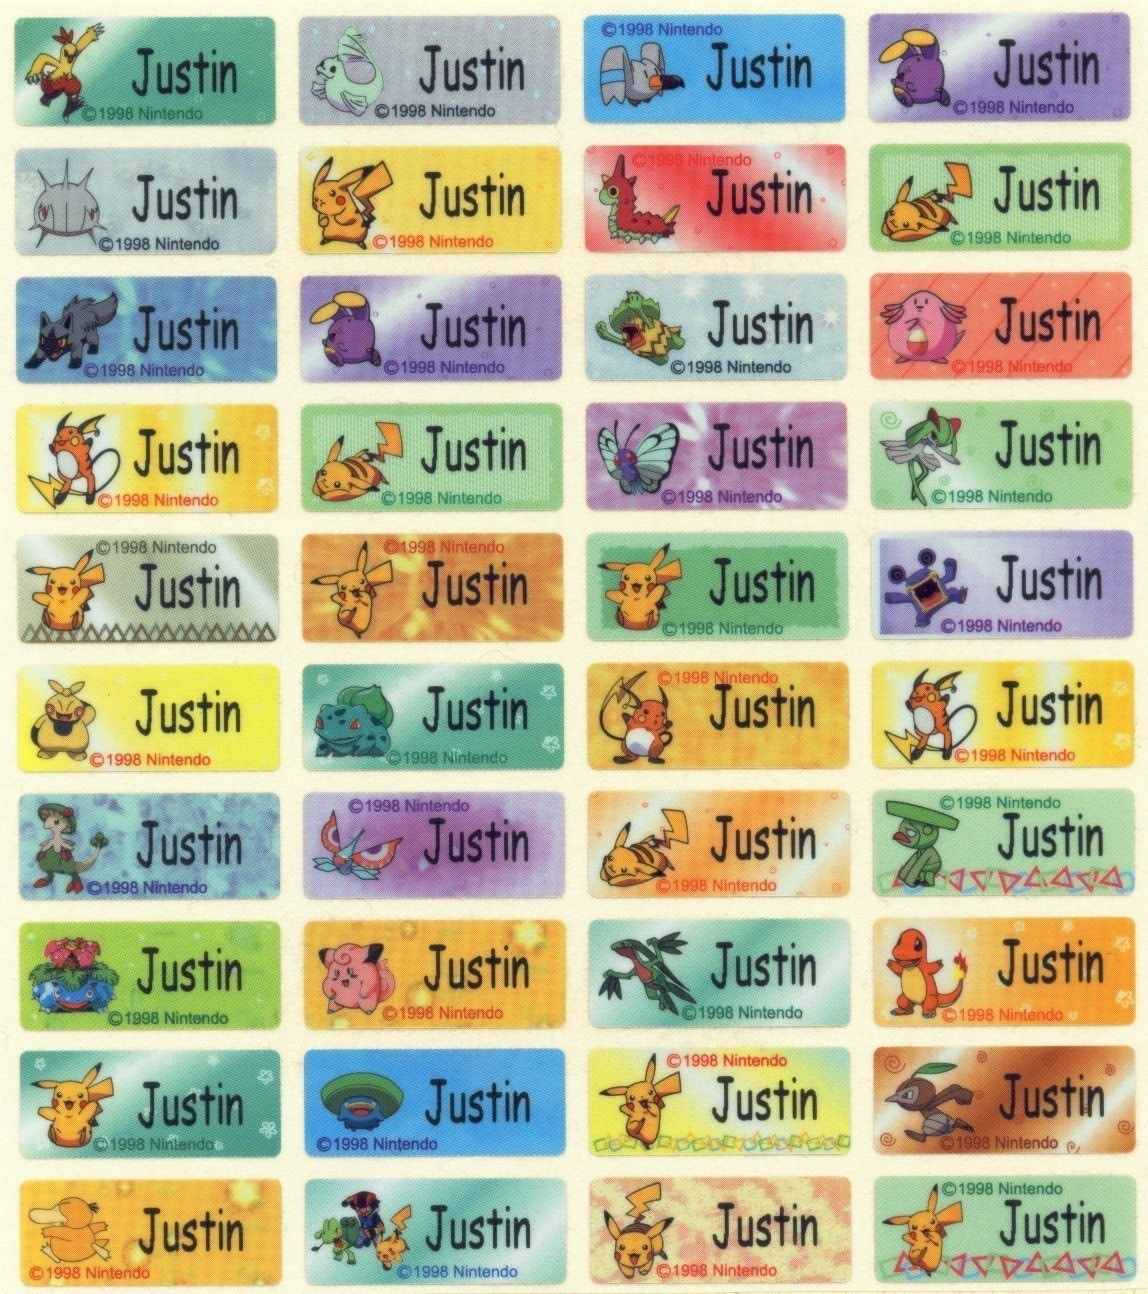 pokemon names and pictures trifox